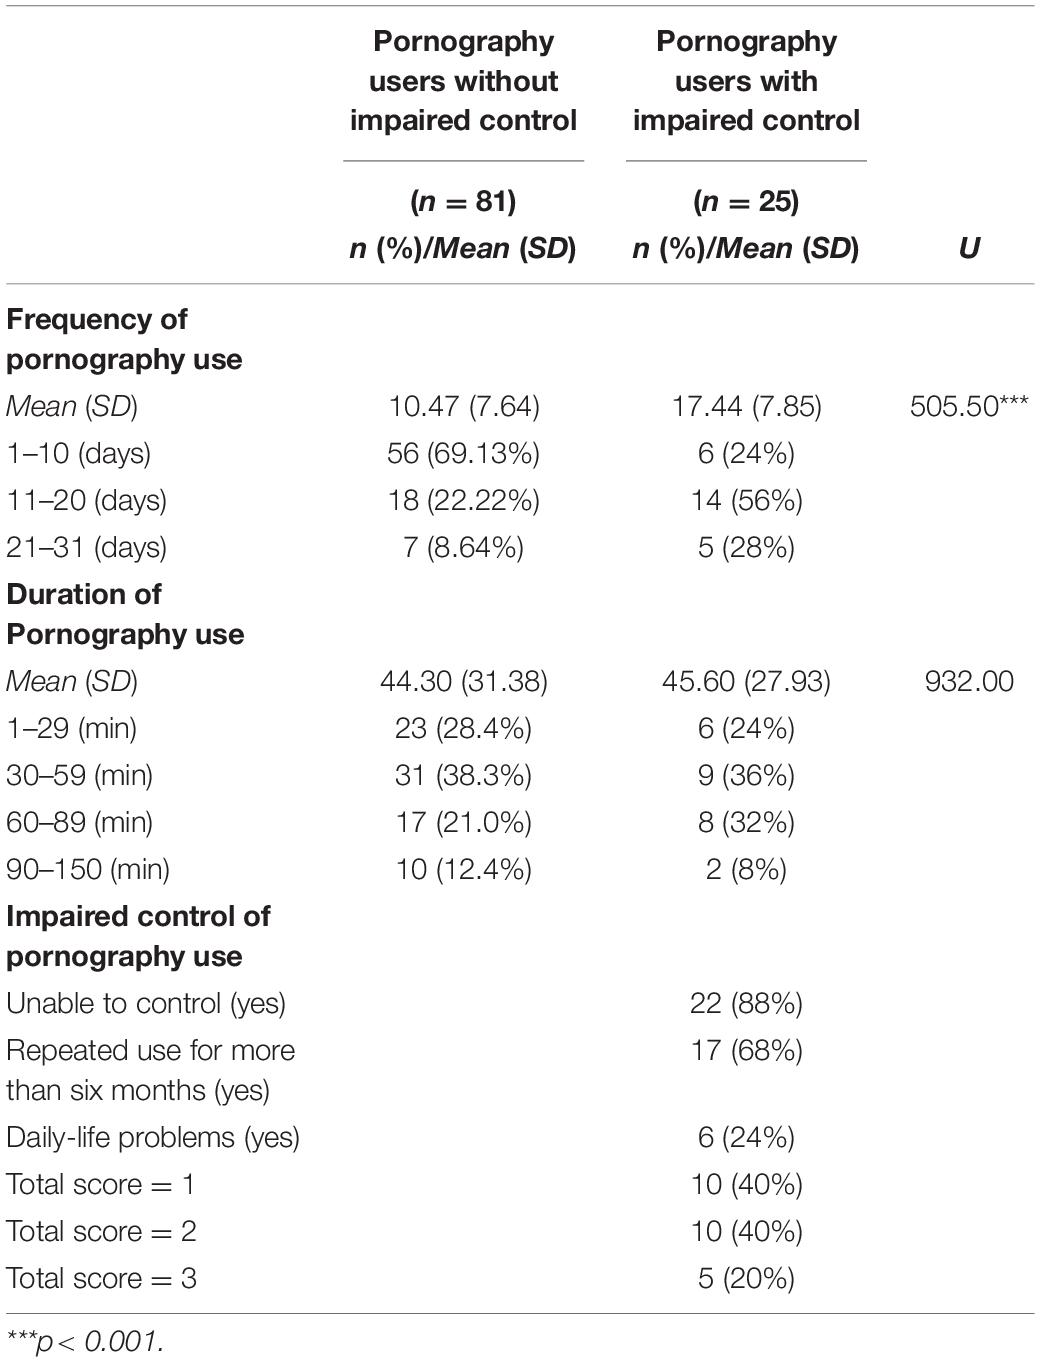 Frontiers | Problematic Pornography Use in Japan: A Preliminary Study Among  University Students